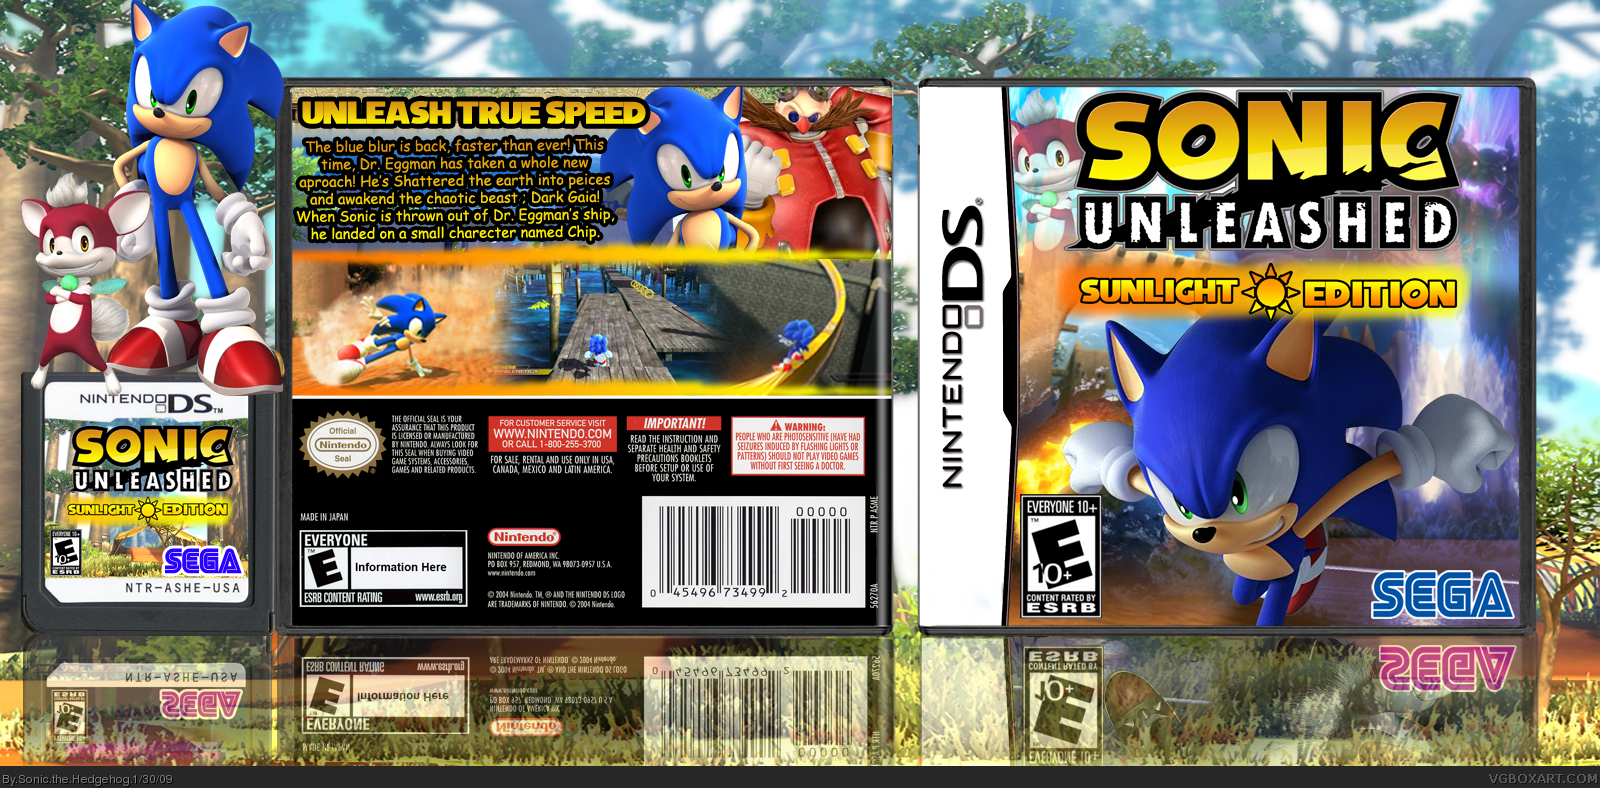 Sonic Unleashed Sunlight Edition box cover